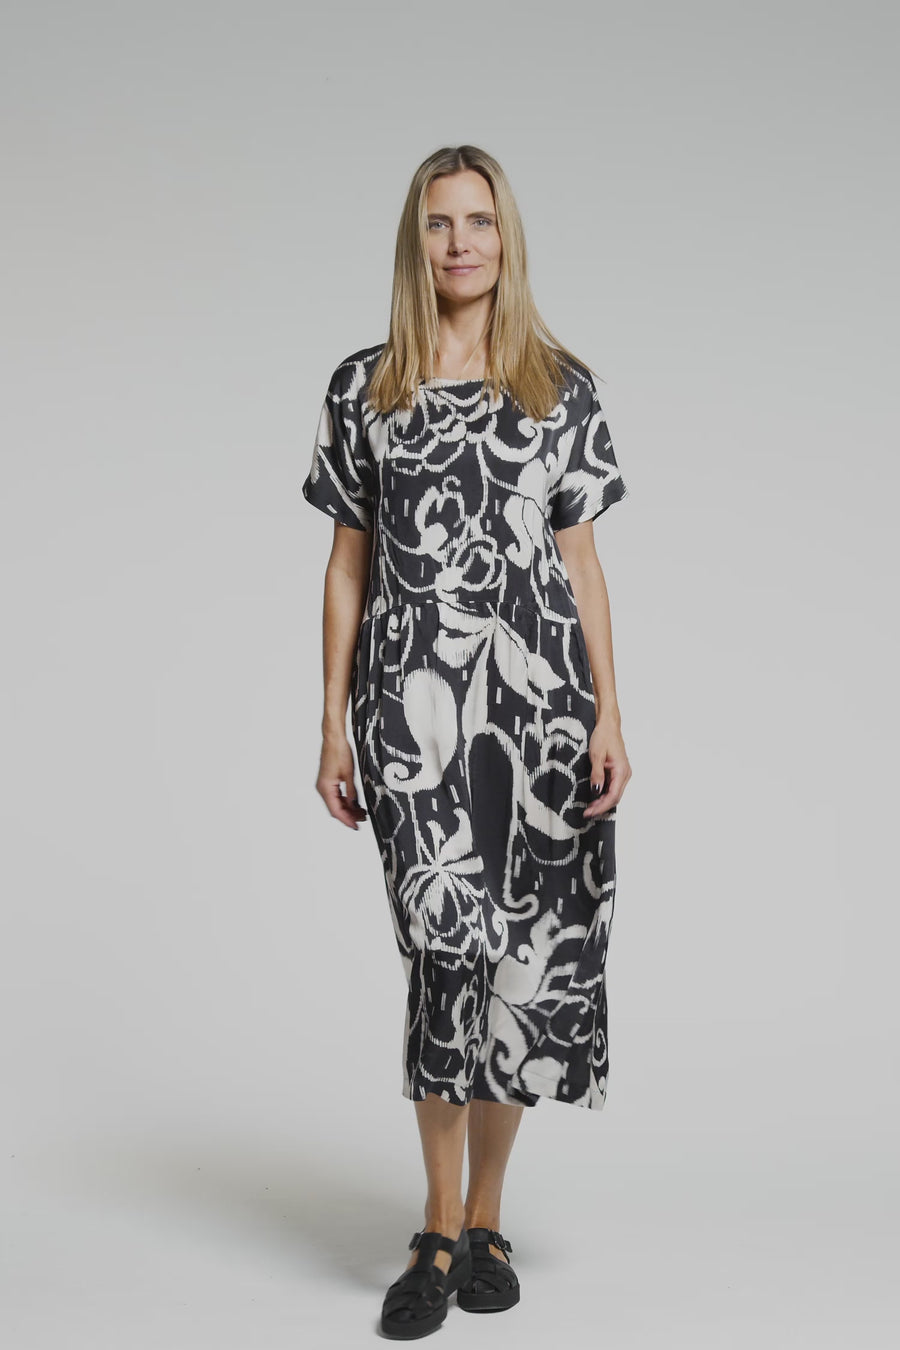 Dress made of printed viscose (330k1) in two print versions